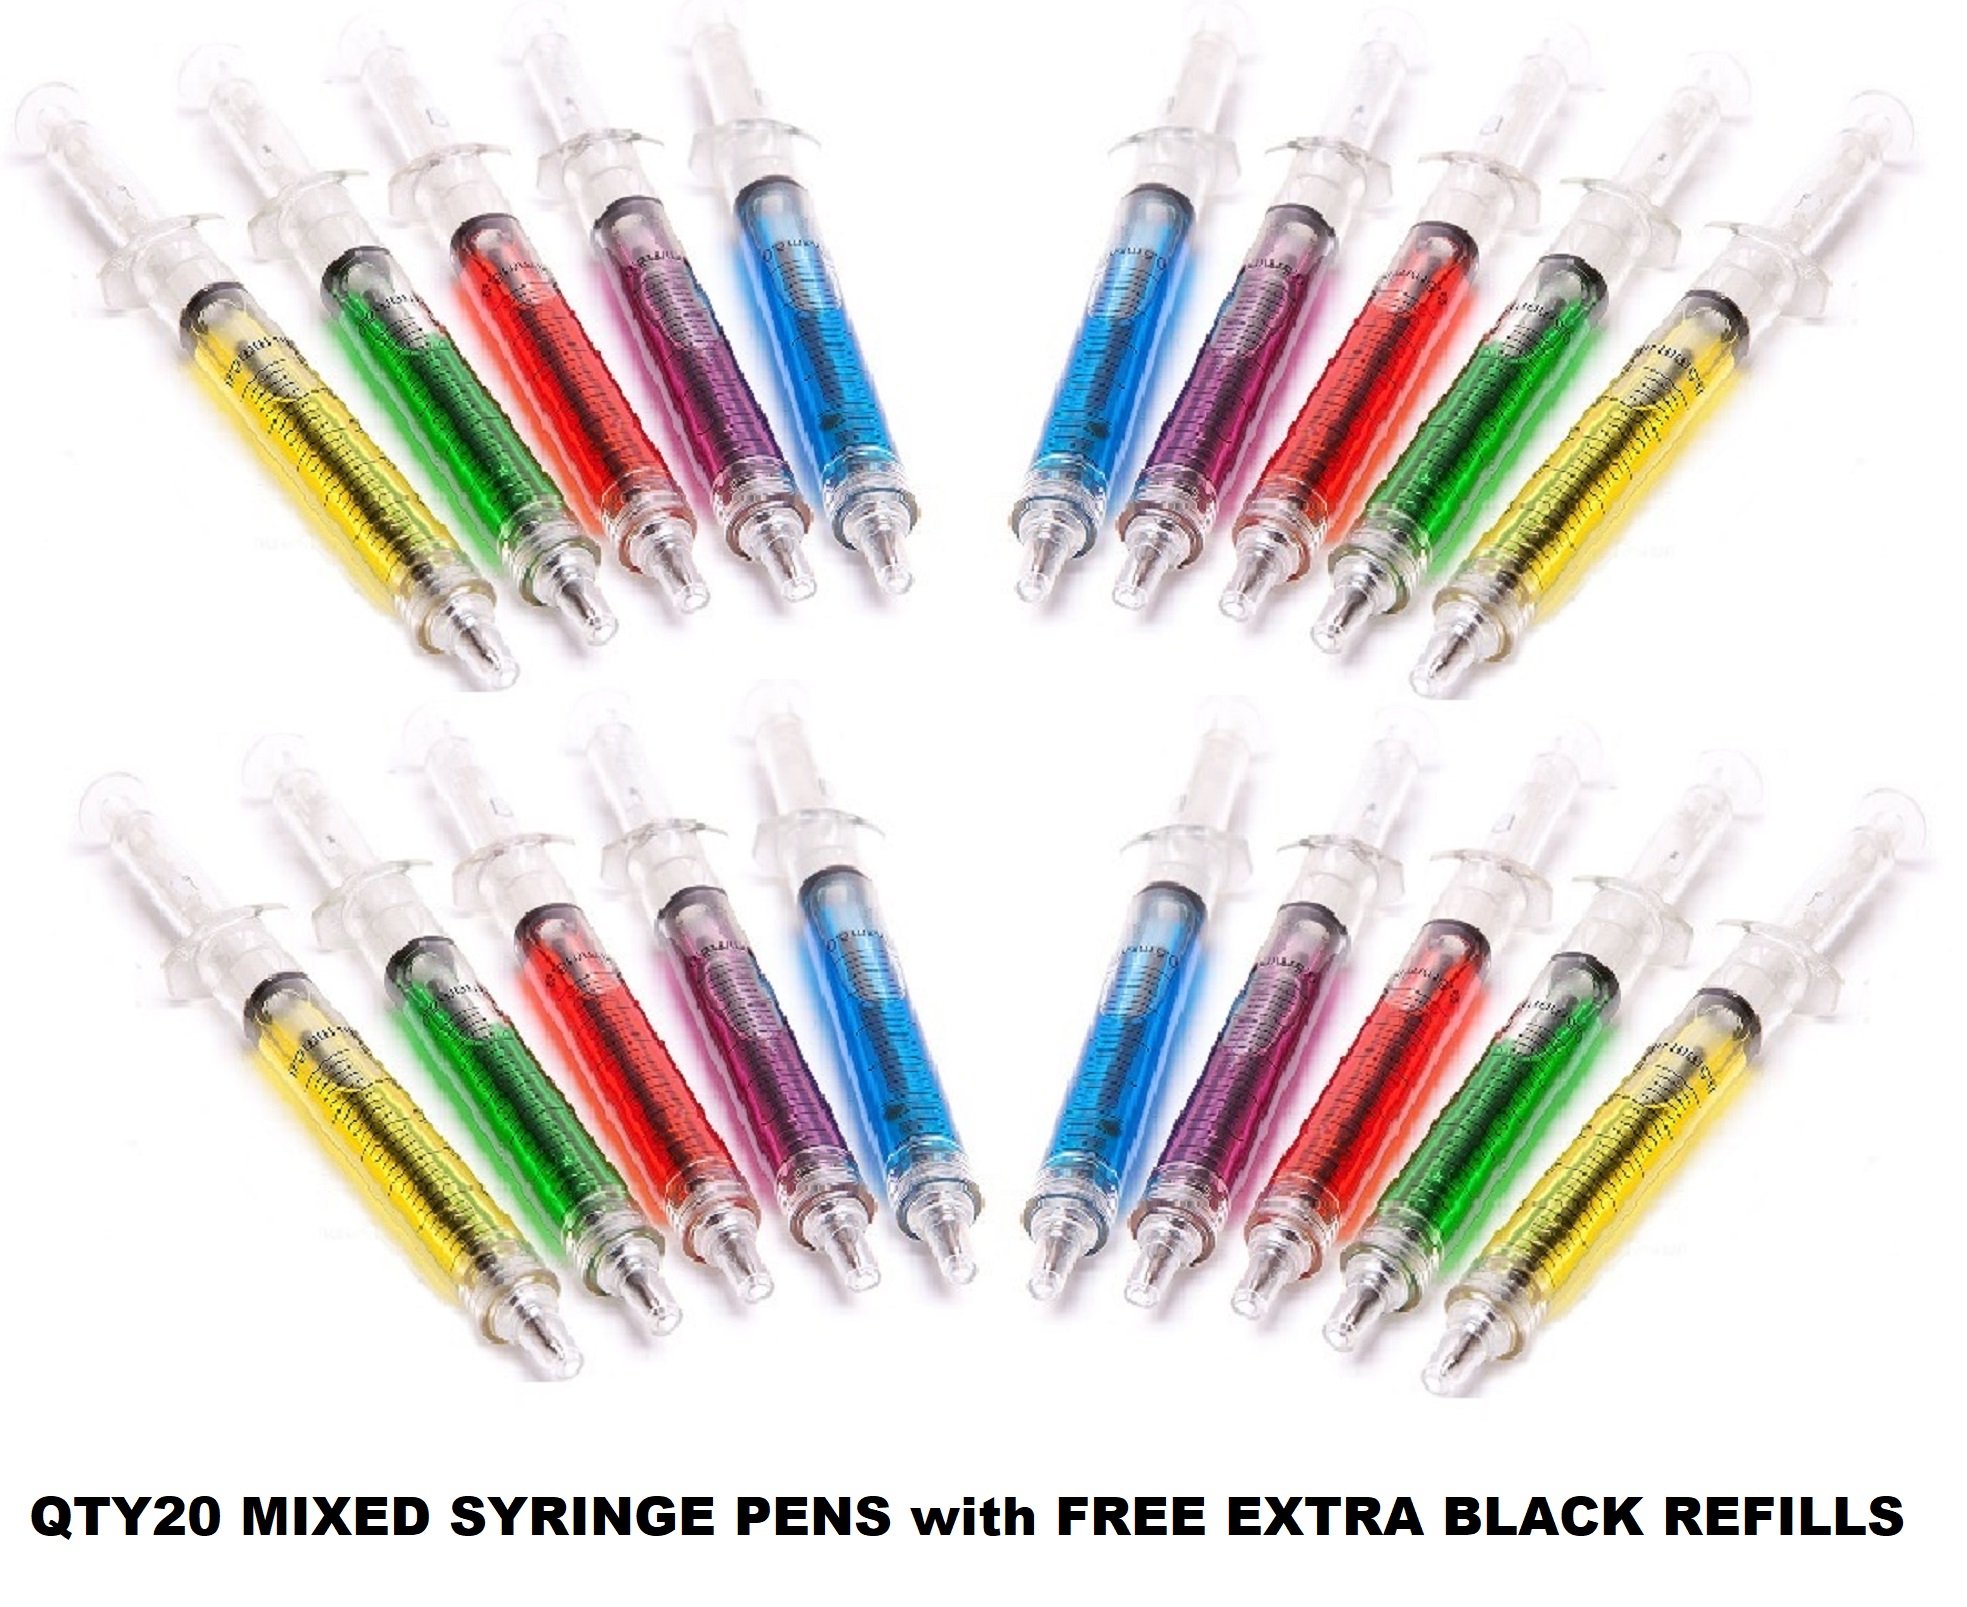 20 mixed syringe pens with refills